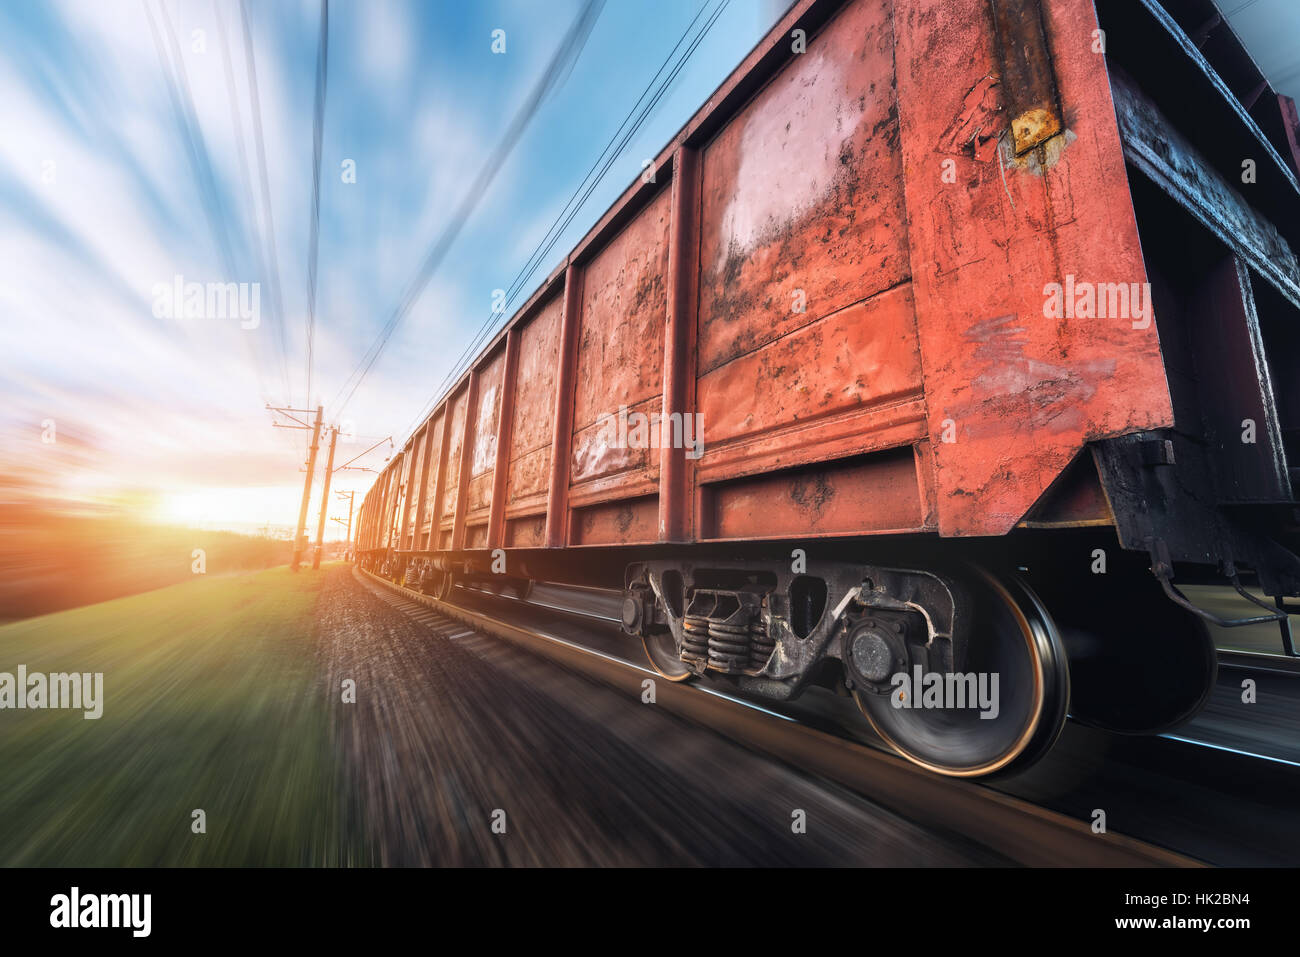 Railway station with cargo wagons and train in motion against sunny sky. Concept industrial landscape at sunset. Railroad. Stock Photo